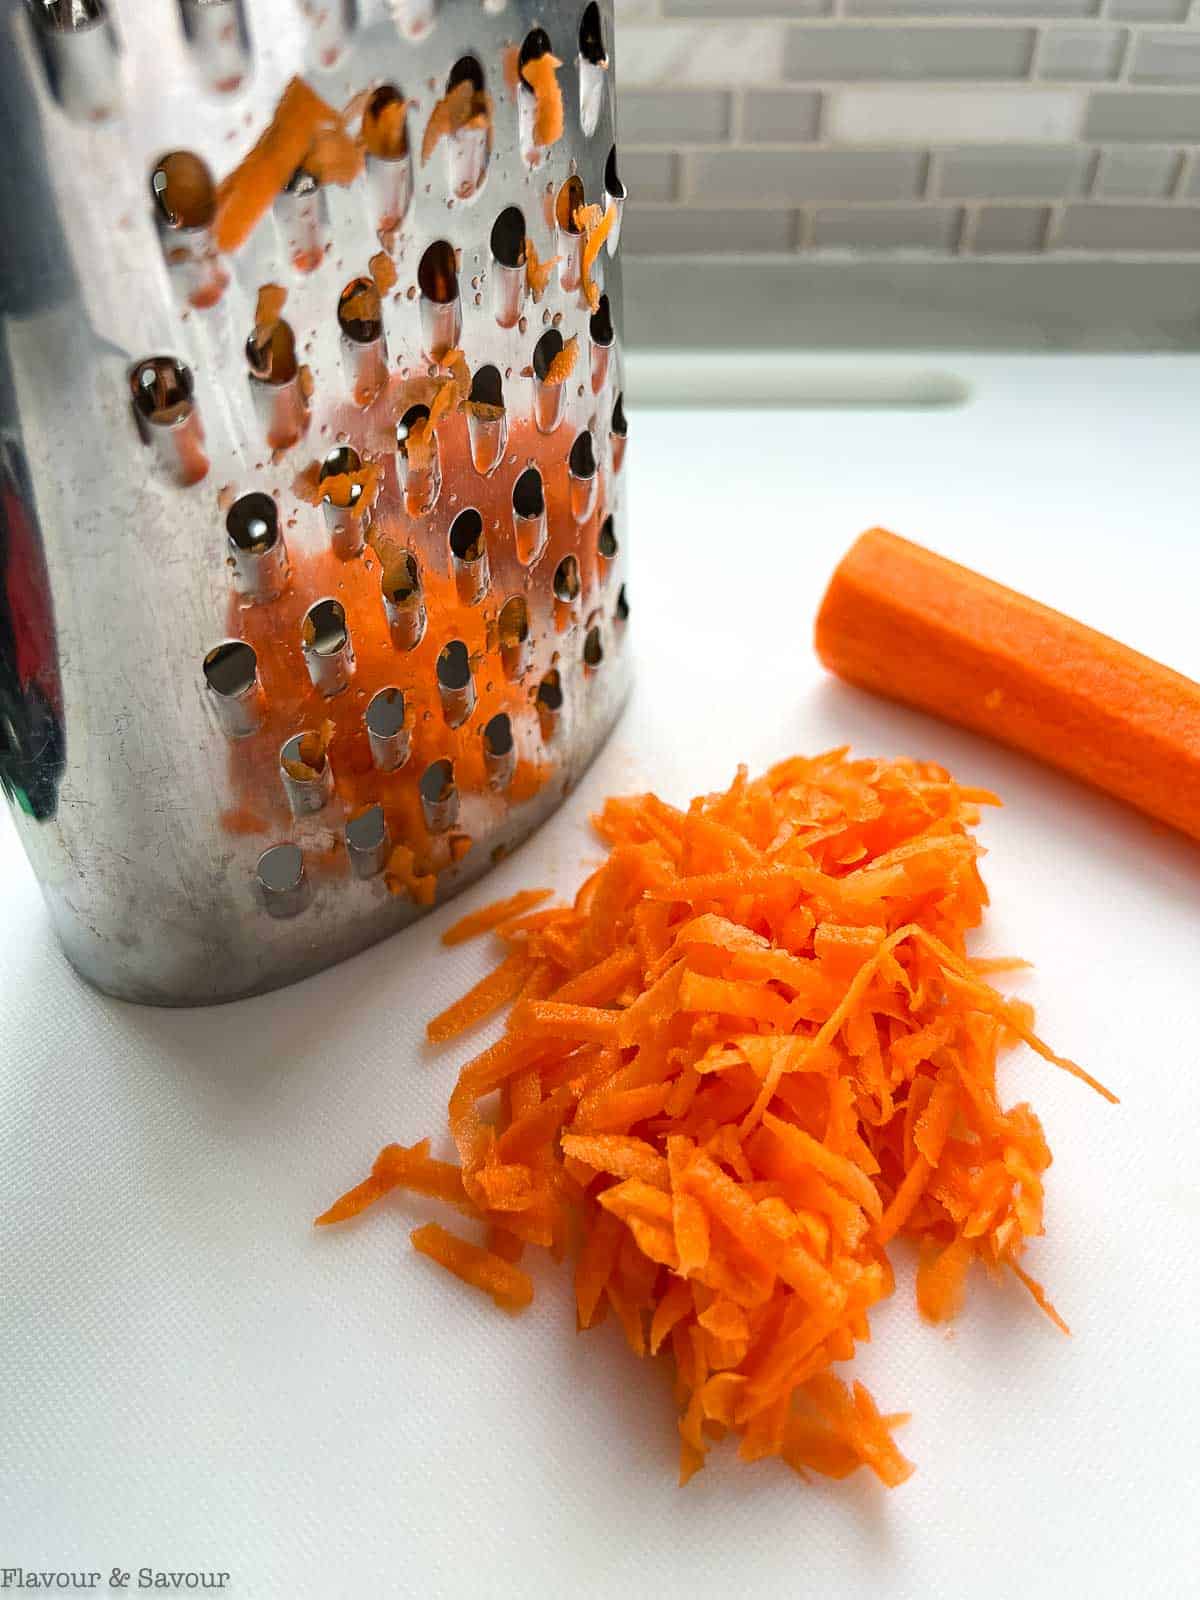 A box grater and grated carrots.